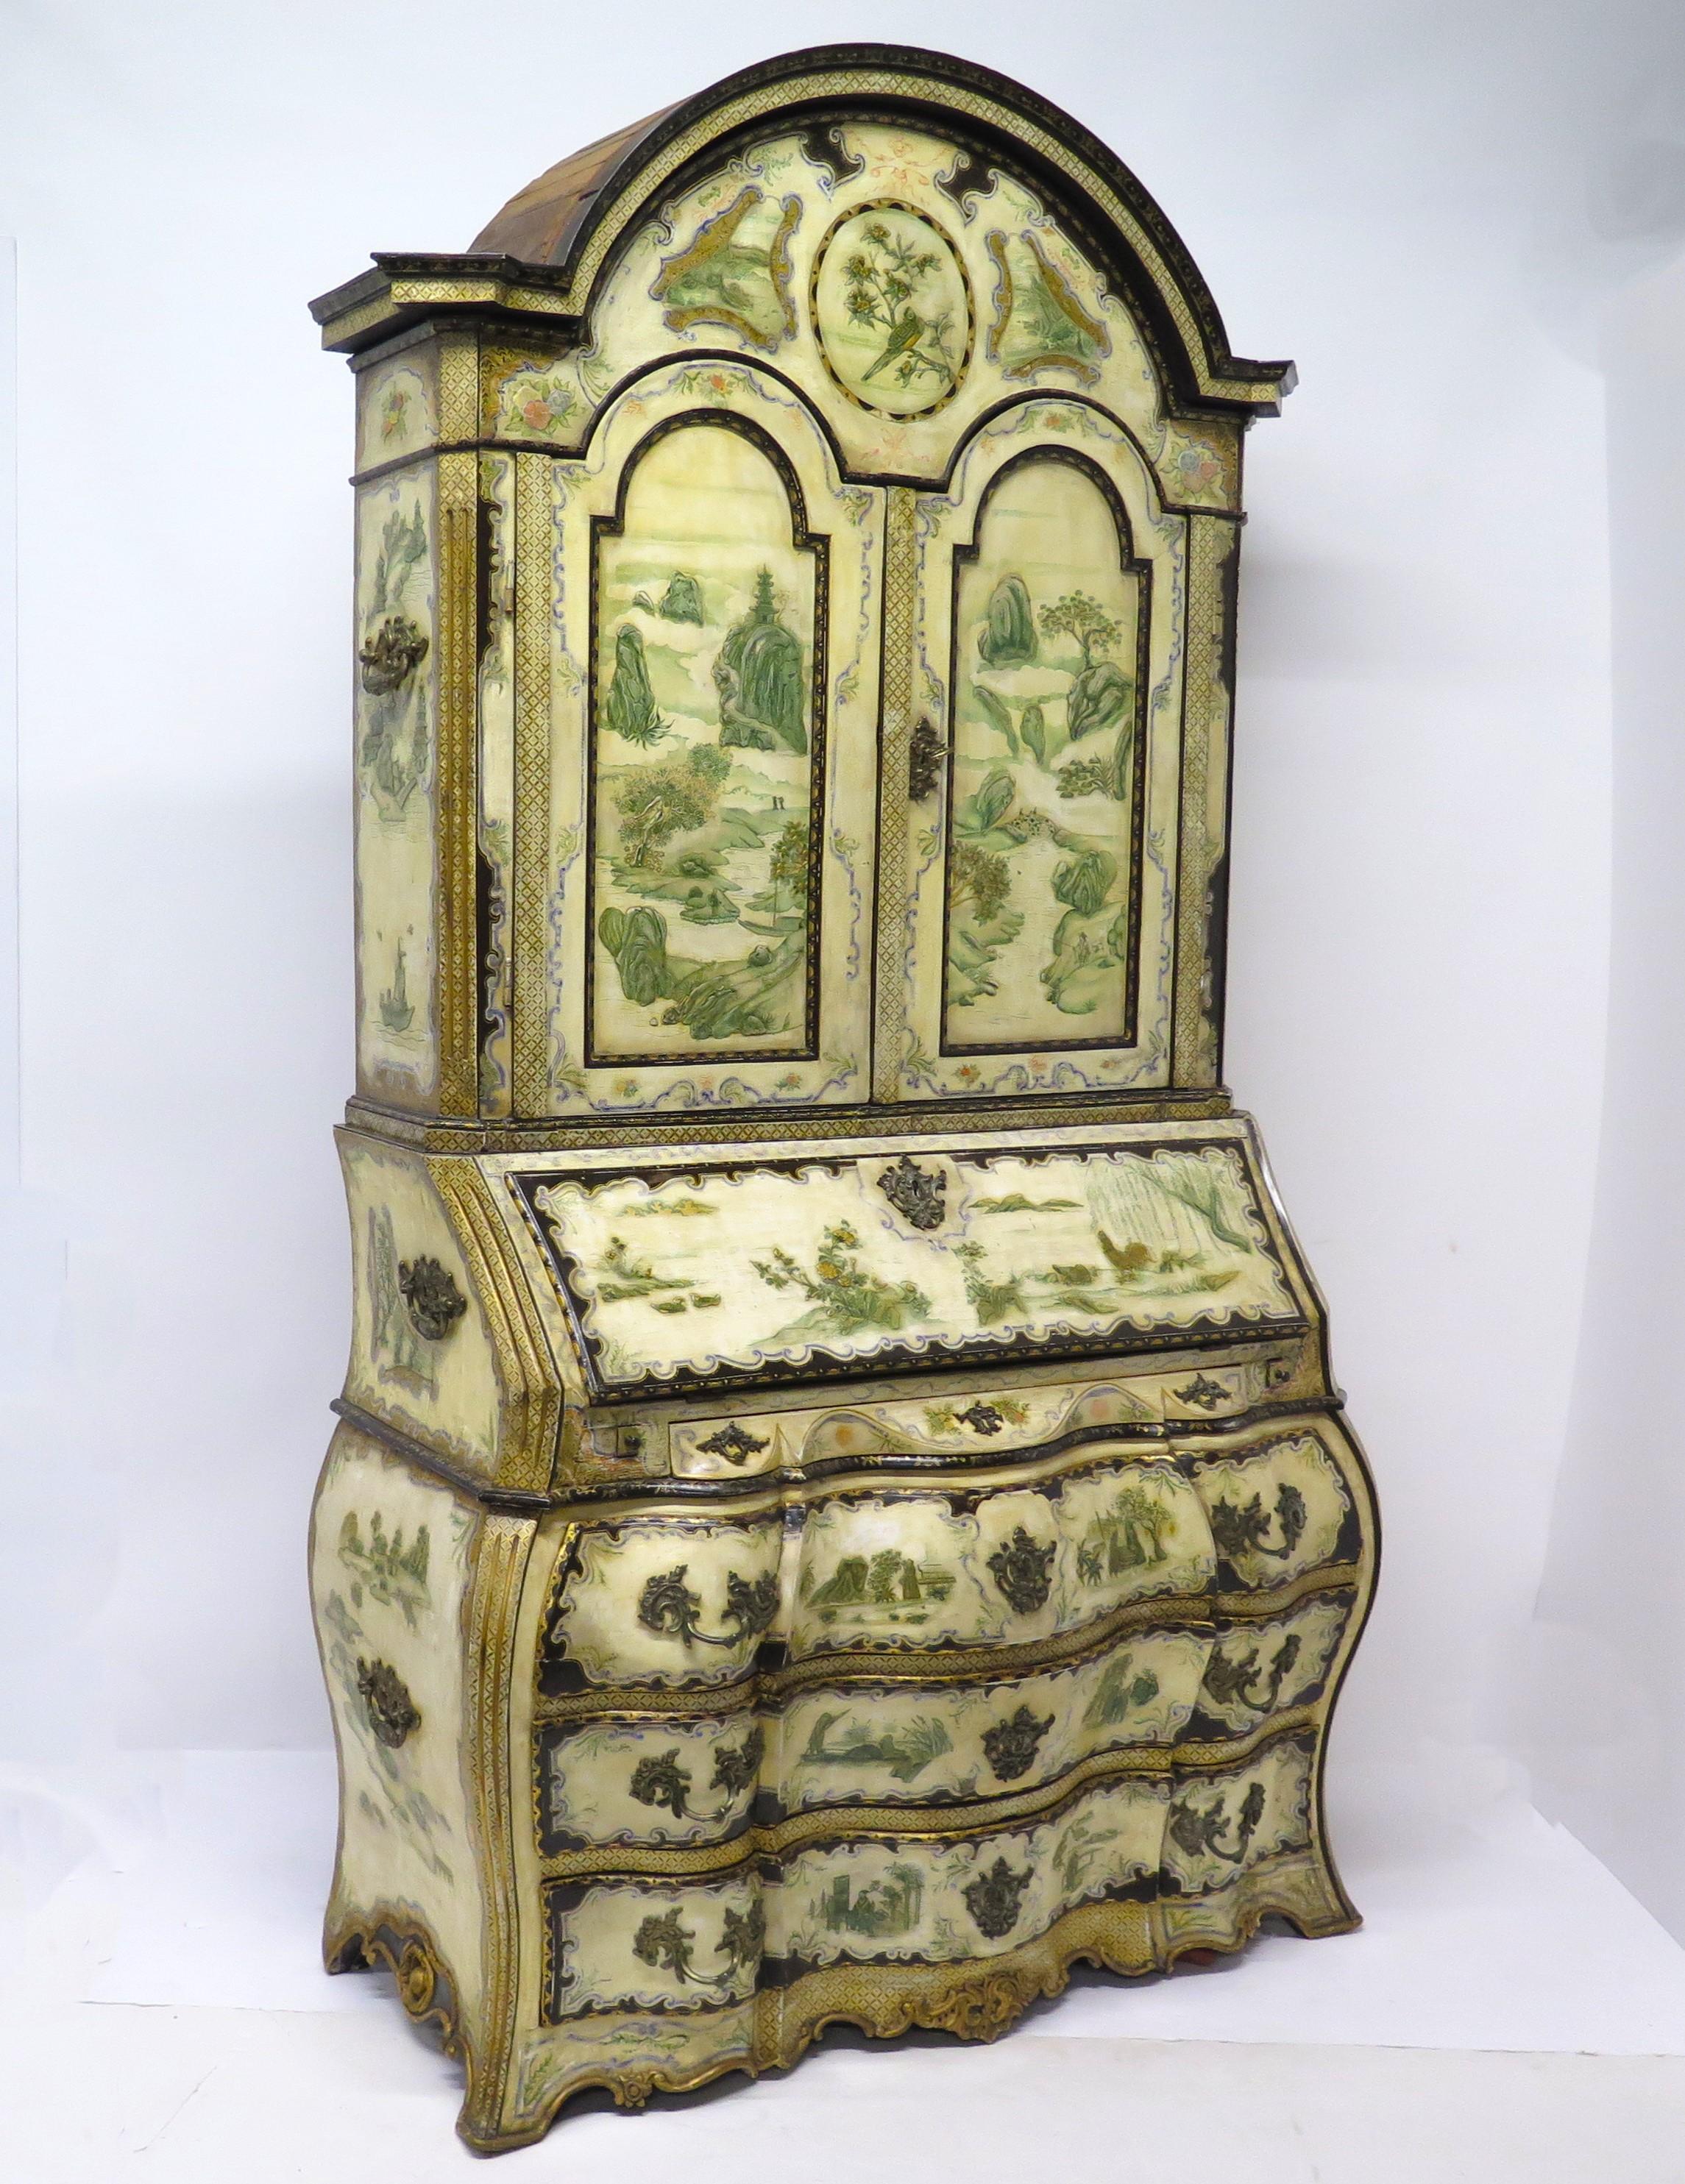 Italian handpainted secretary / desk in chinoiserie design, top features molded shape cornice with two doors revealing three shelves and two small drawers, in the lower part is a beautiful fall front desk decorated and painted, further down are four